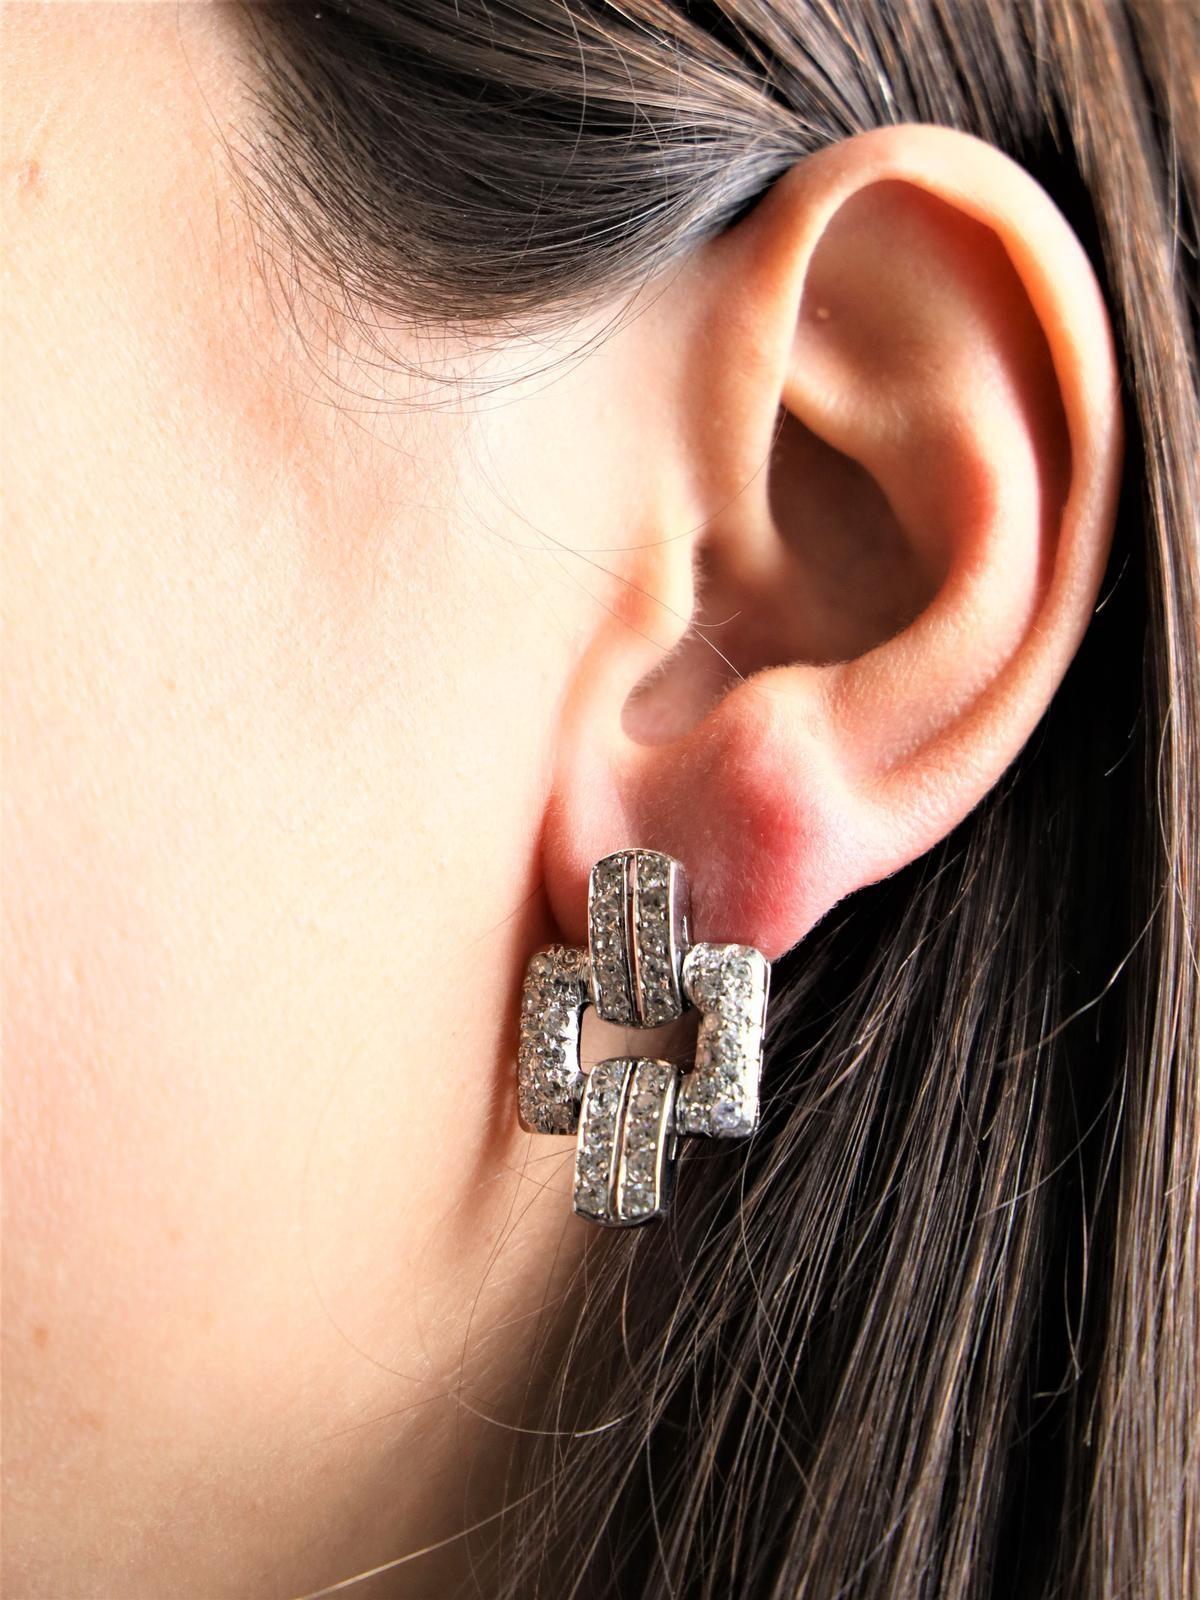 Pair of art deco earrings. in platinum 950 thousandths and white gold 750 thousandths (18 carats). set with 84 diamonds (42 each). cut eight/eight. about 0.04 ct each. Total weight of diamonds: 3.36 cts. Length: 2.55 cm. Width: 1.70 cm. Total